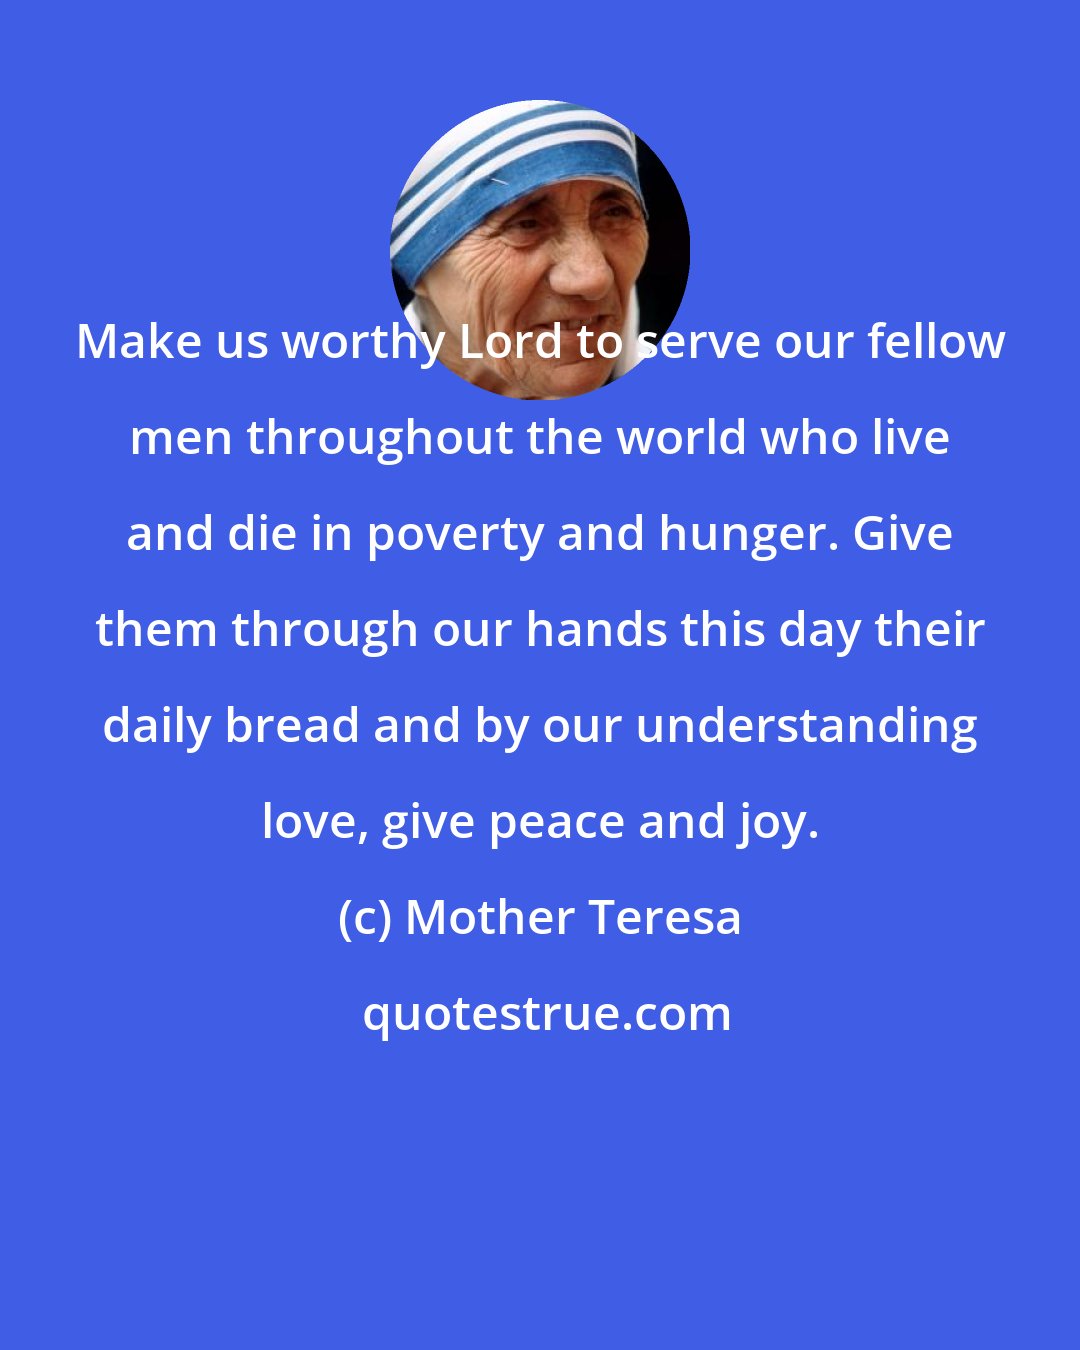 Mother Teresa: Make us worthy Lord to serve our fellow men throughout the world who live and die in poverty and hunger. Give them through our hands this day their daily bread and by our understanding love, give peace and joy.